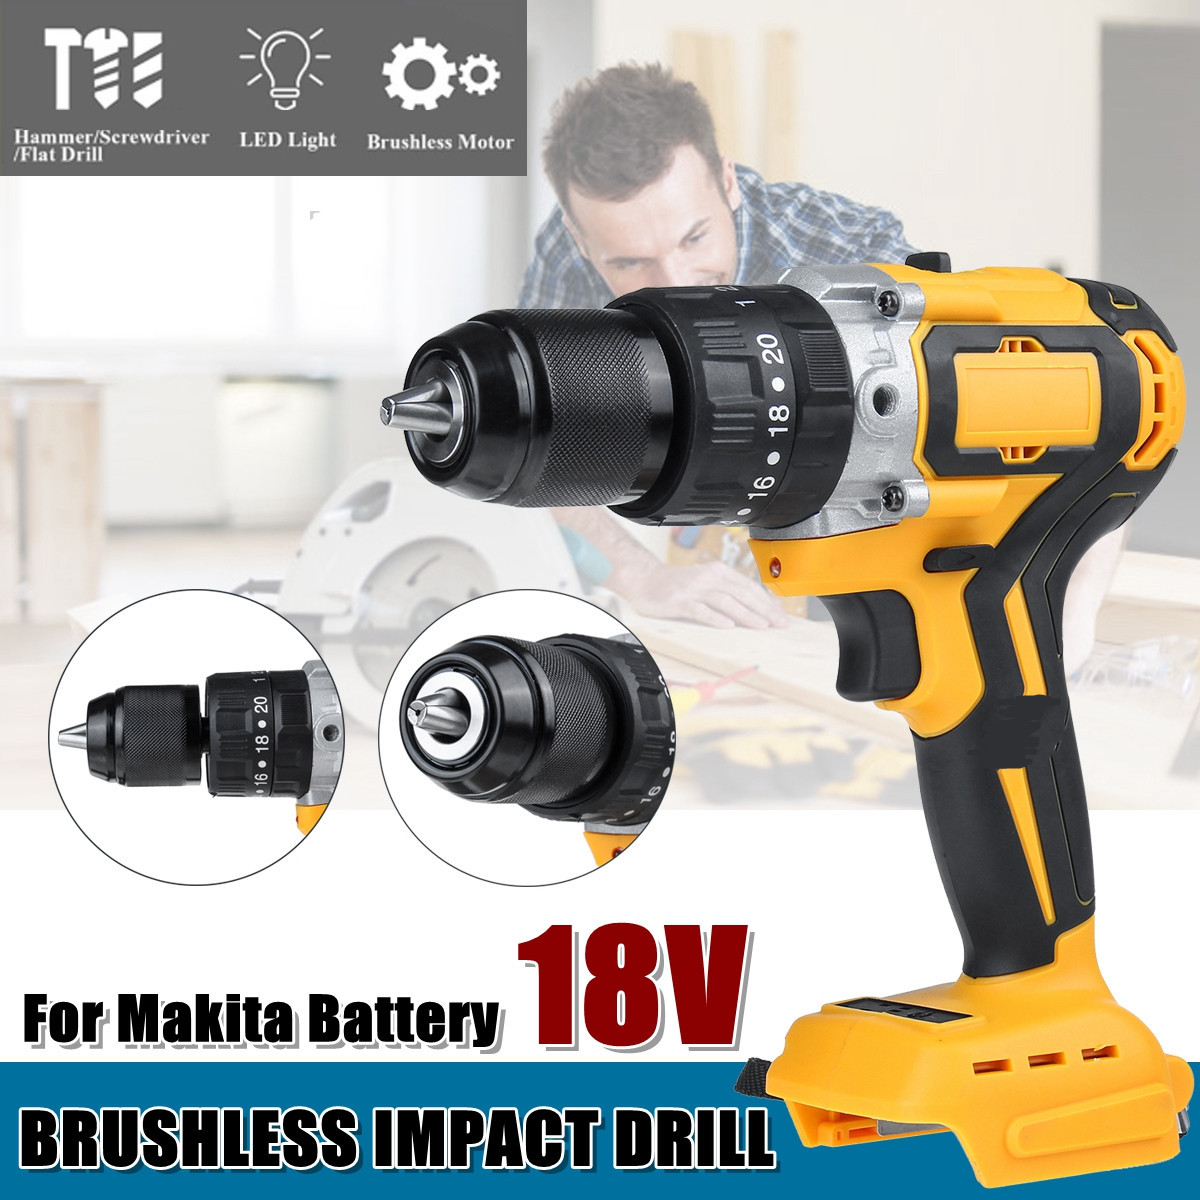 18V-Electric-Impact-Drill-13mm-4000RPM-Brushless-Electric-Screwdriver-for-Makita-Battery-1724290-2